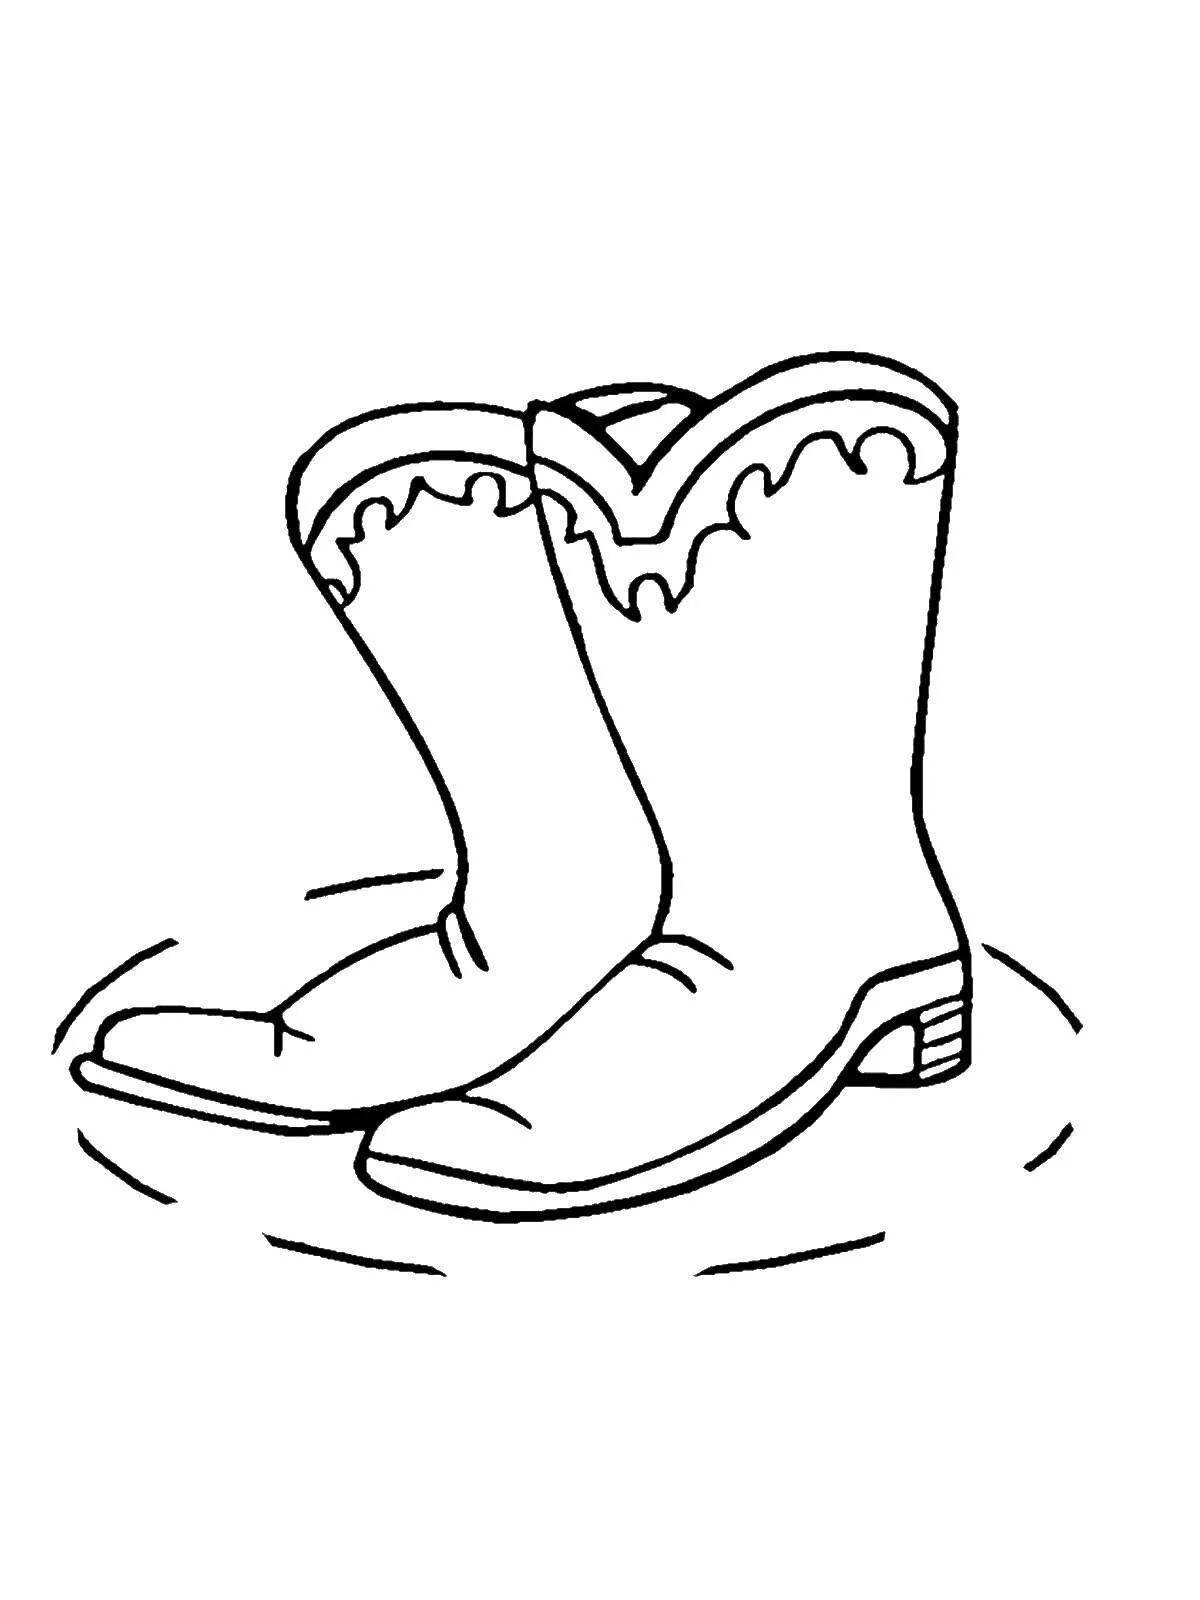 Incredible walking boots coloring page